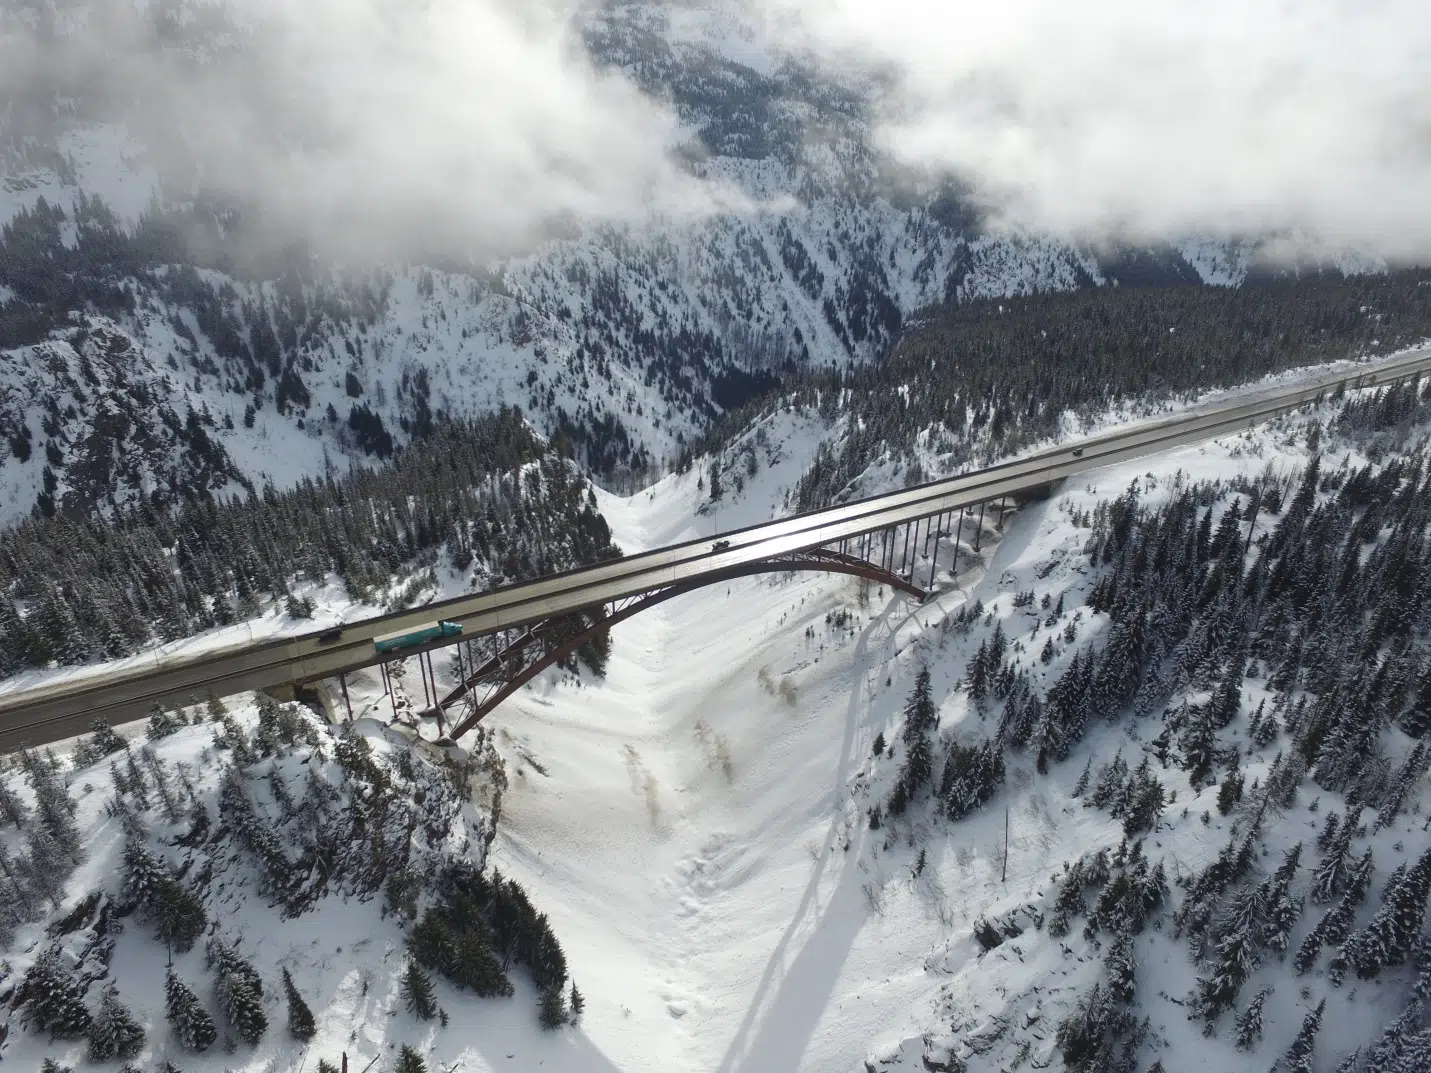 Merritt mayor hopeful that the province is looking at further safety measures on the Coquihalla